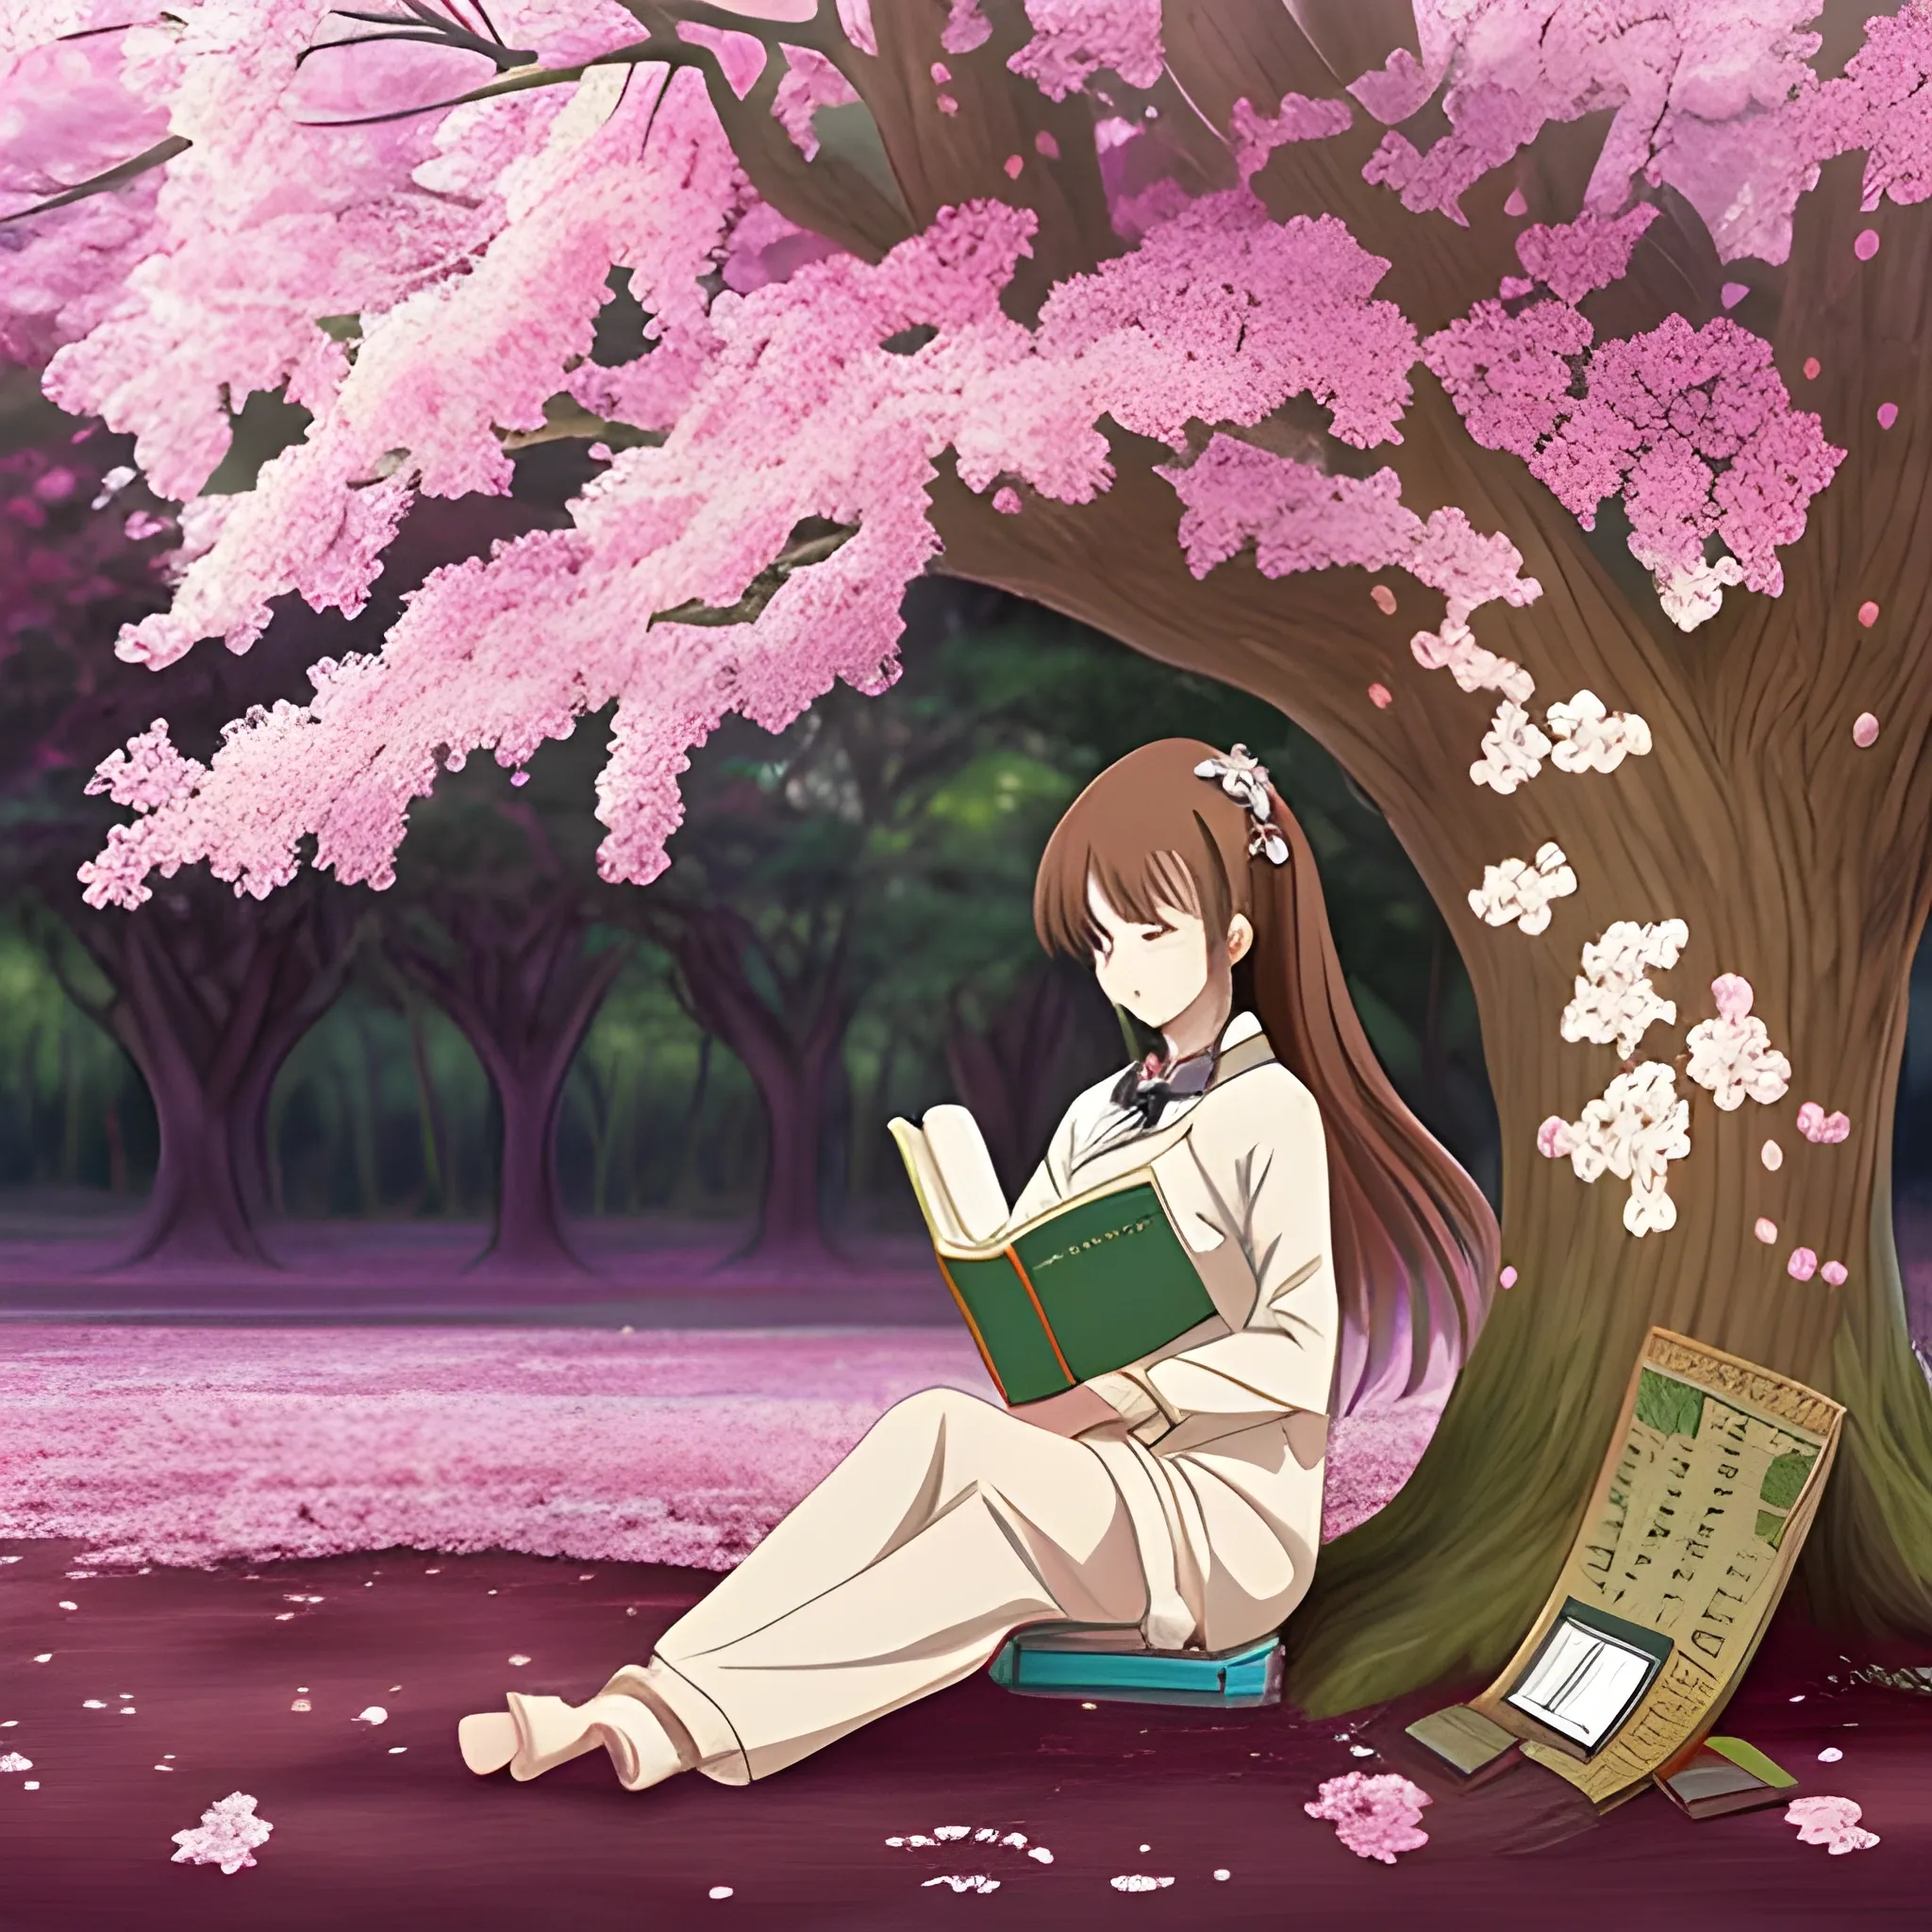 Anime woman sitting u see a blossom tree reading a book and she has brown hair , Trippy